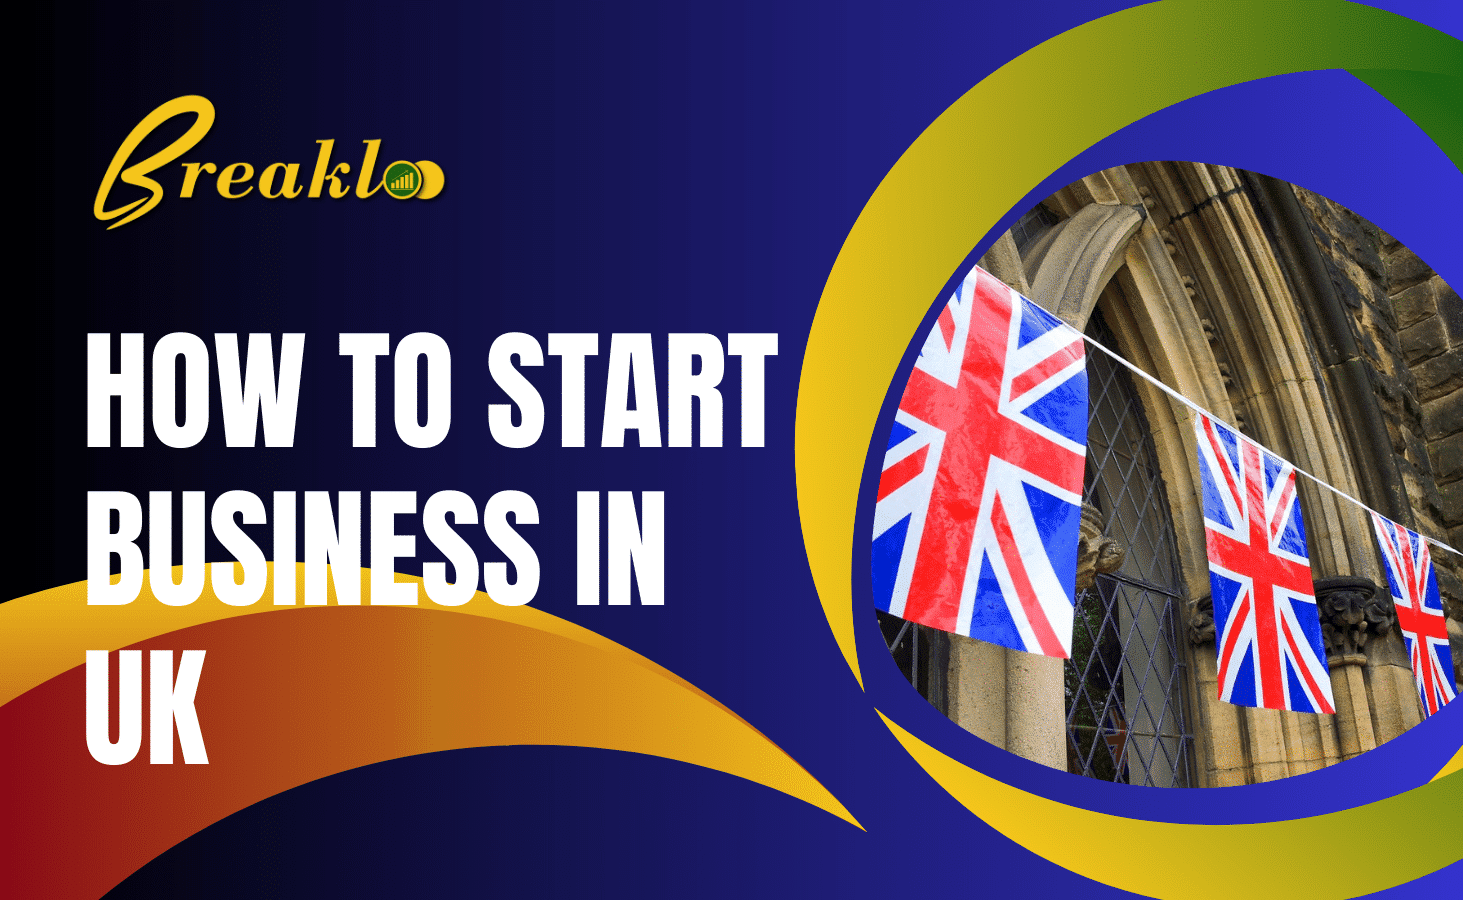 How to Start Business in UK